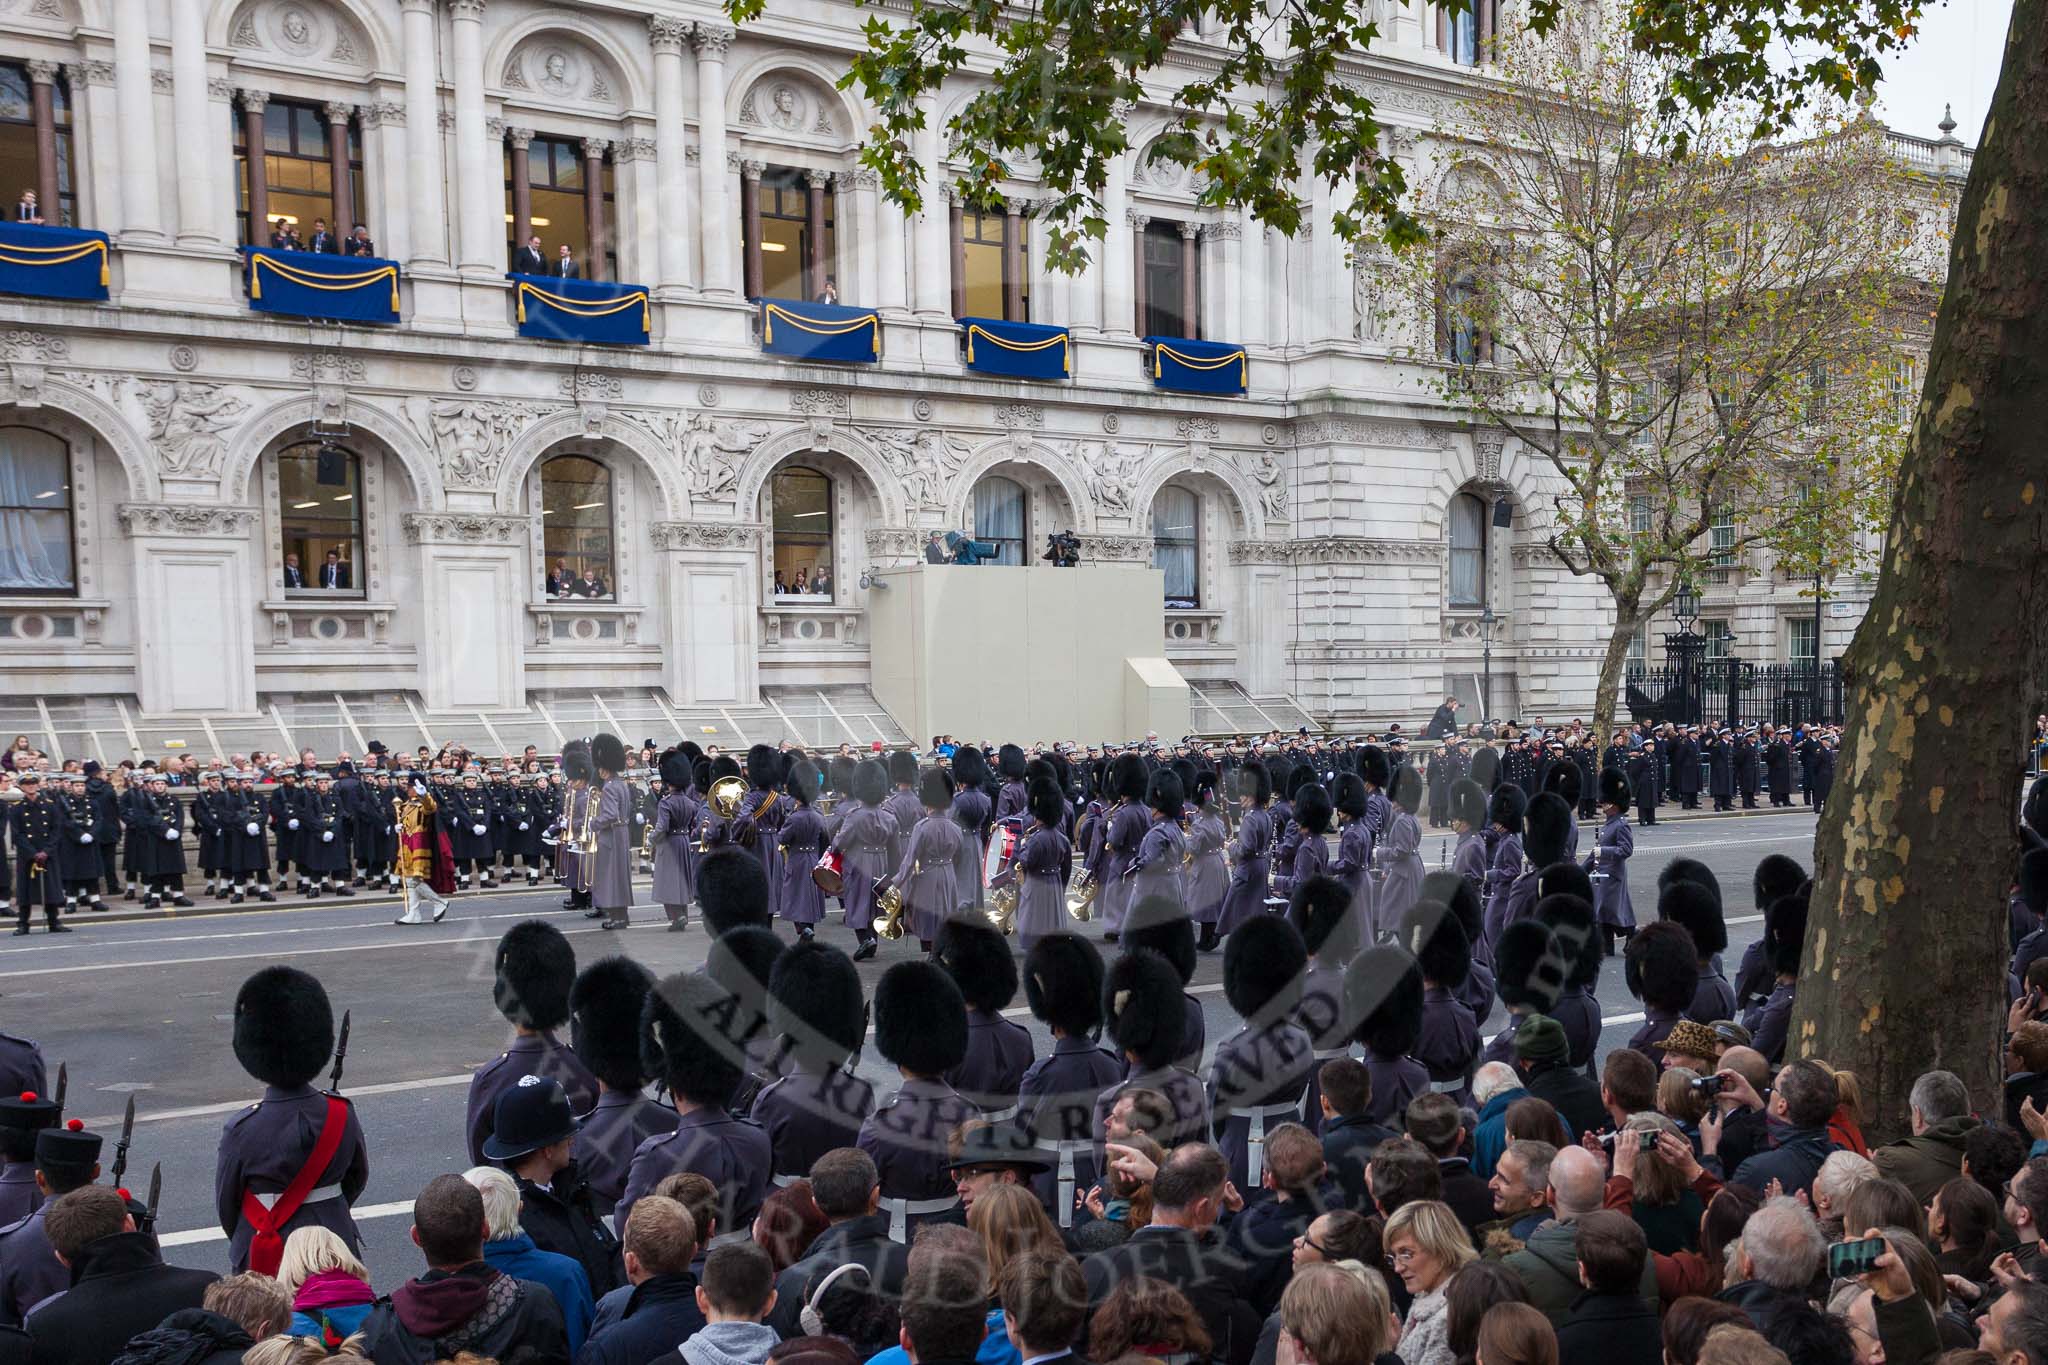 Remembrance Sunday at the Cenotaph 2015: The Massed Bands move position to allow  the second of the three columns of veterans to march past the Cenotaph.
Cenotaph, Whitehall, London SW1,
London,
Greater London,
United Kingdom,
on 08 November 2015 at 11:56, image #748